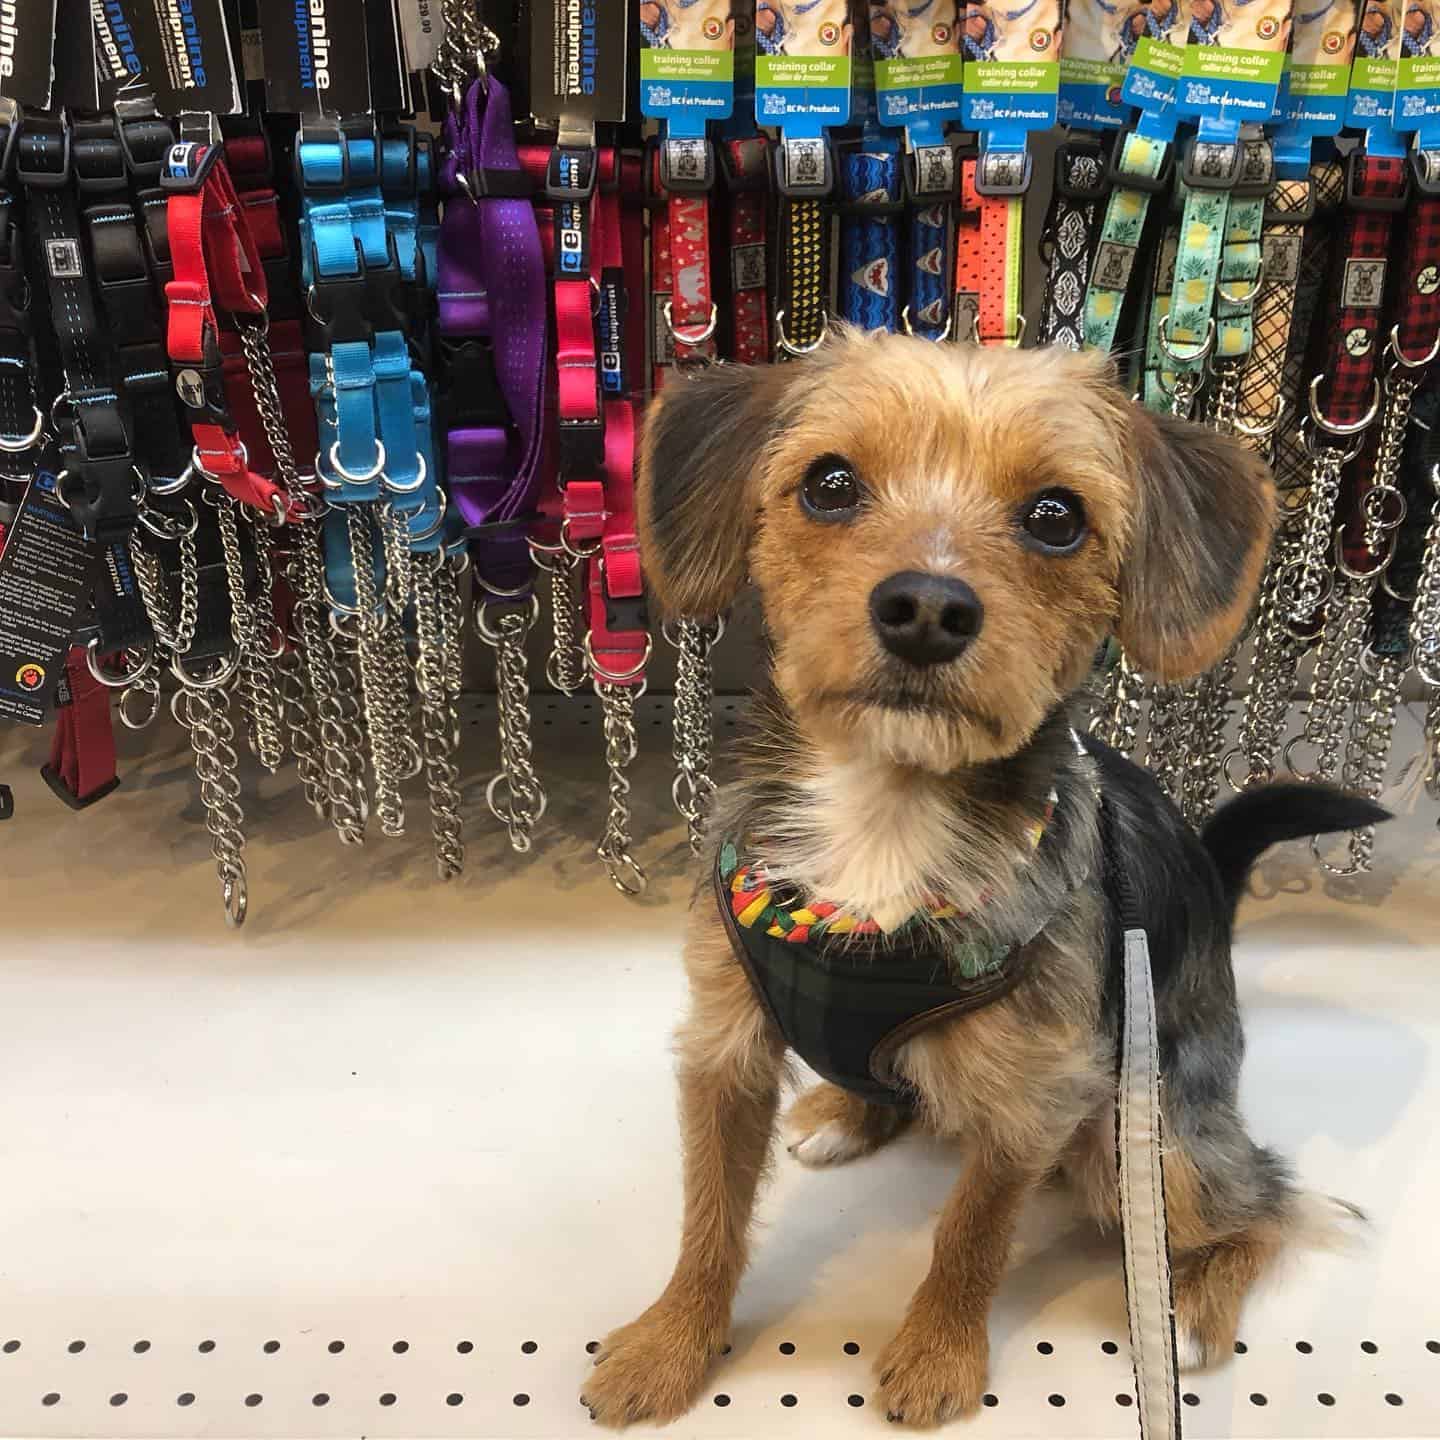 Beagle Yorkie dog sitting in the pet store